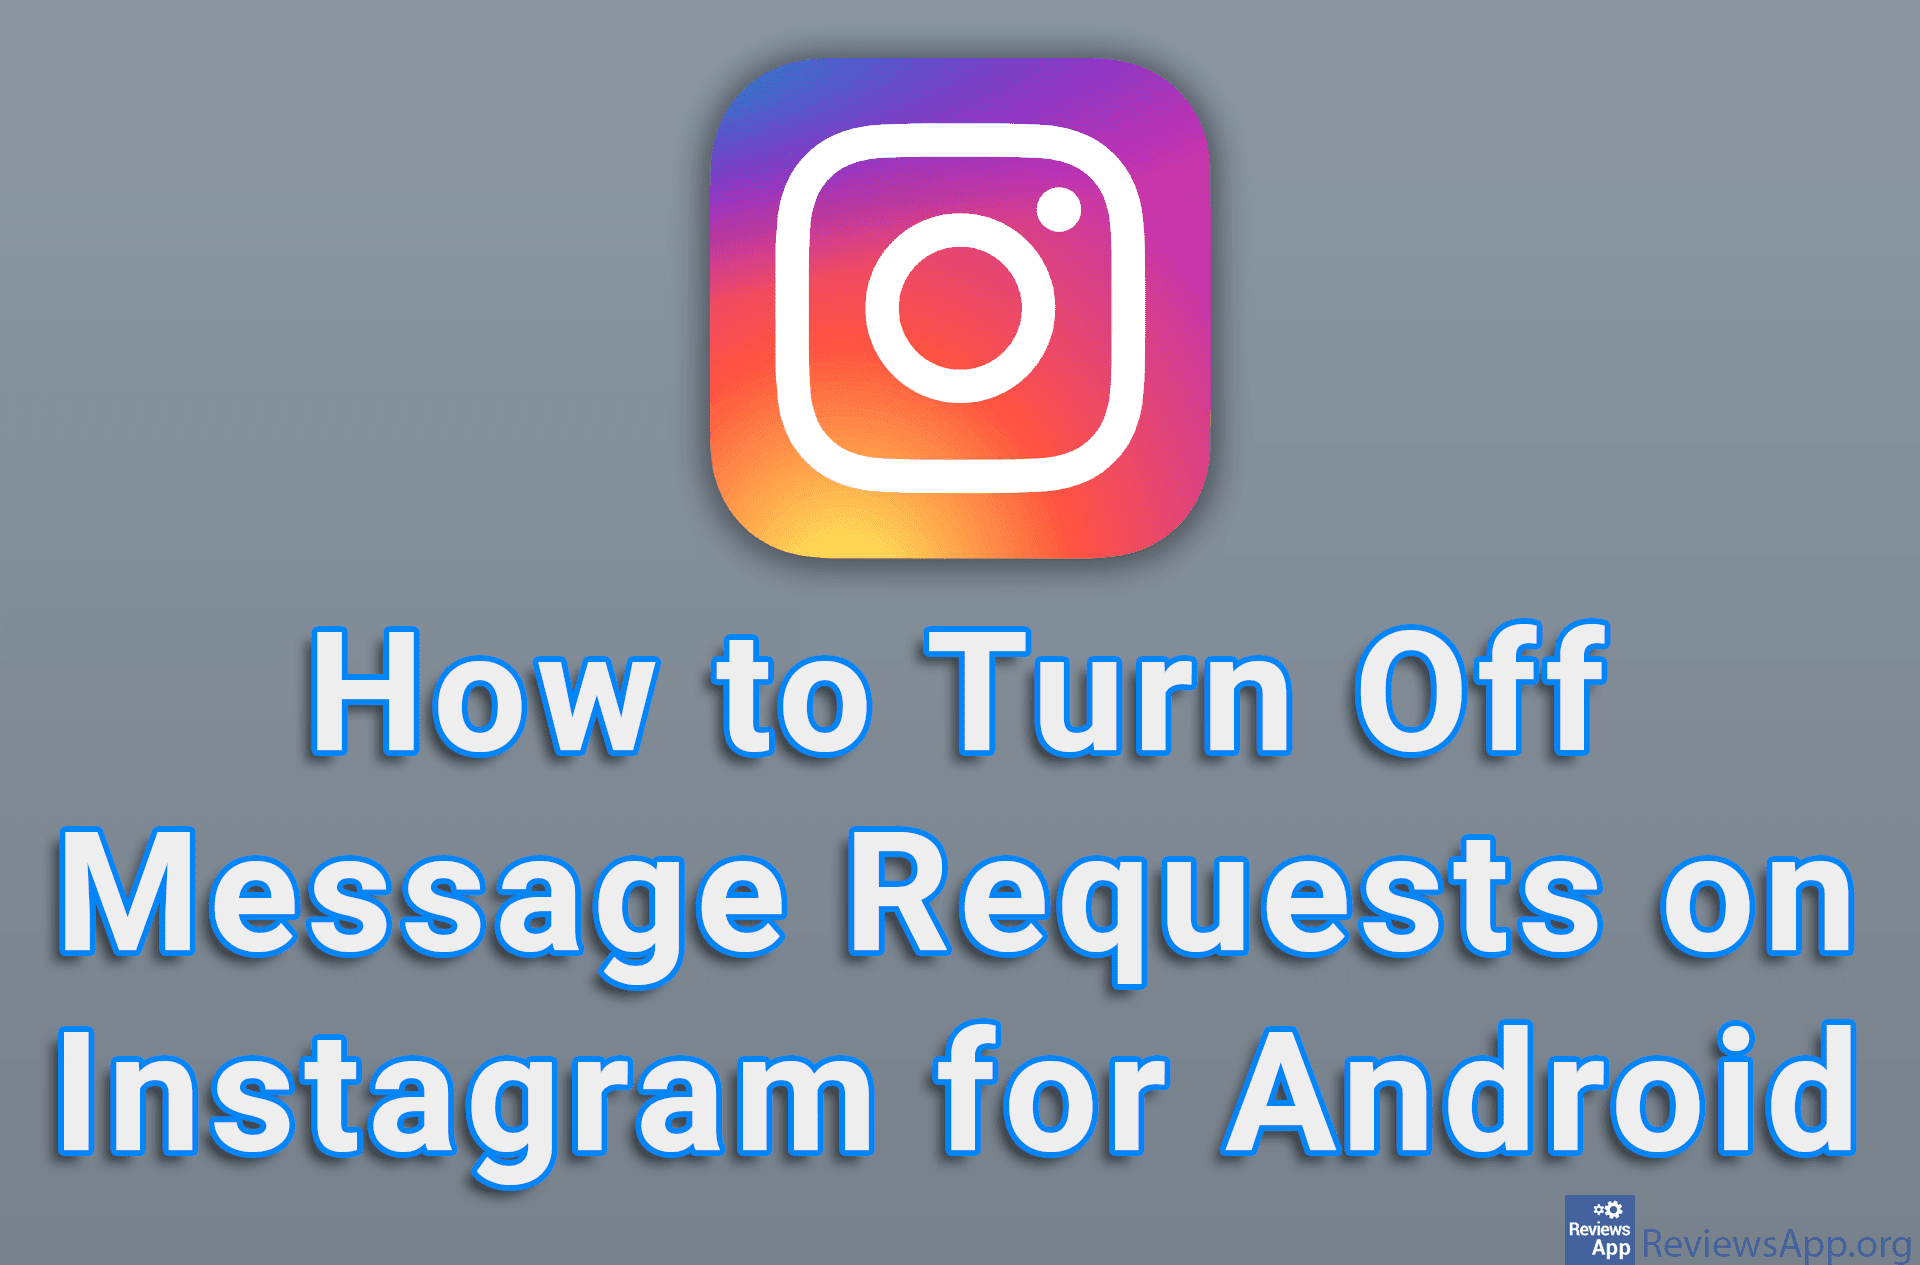 How to Turn Off Message Requests on Instagram for Android